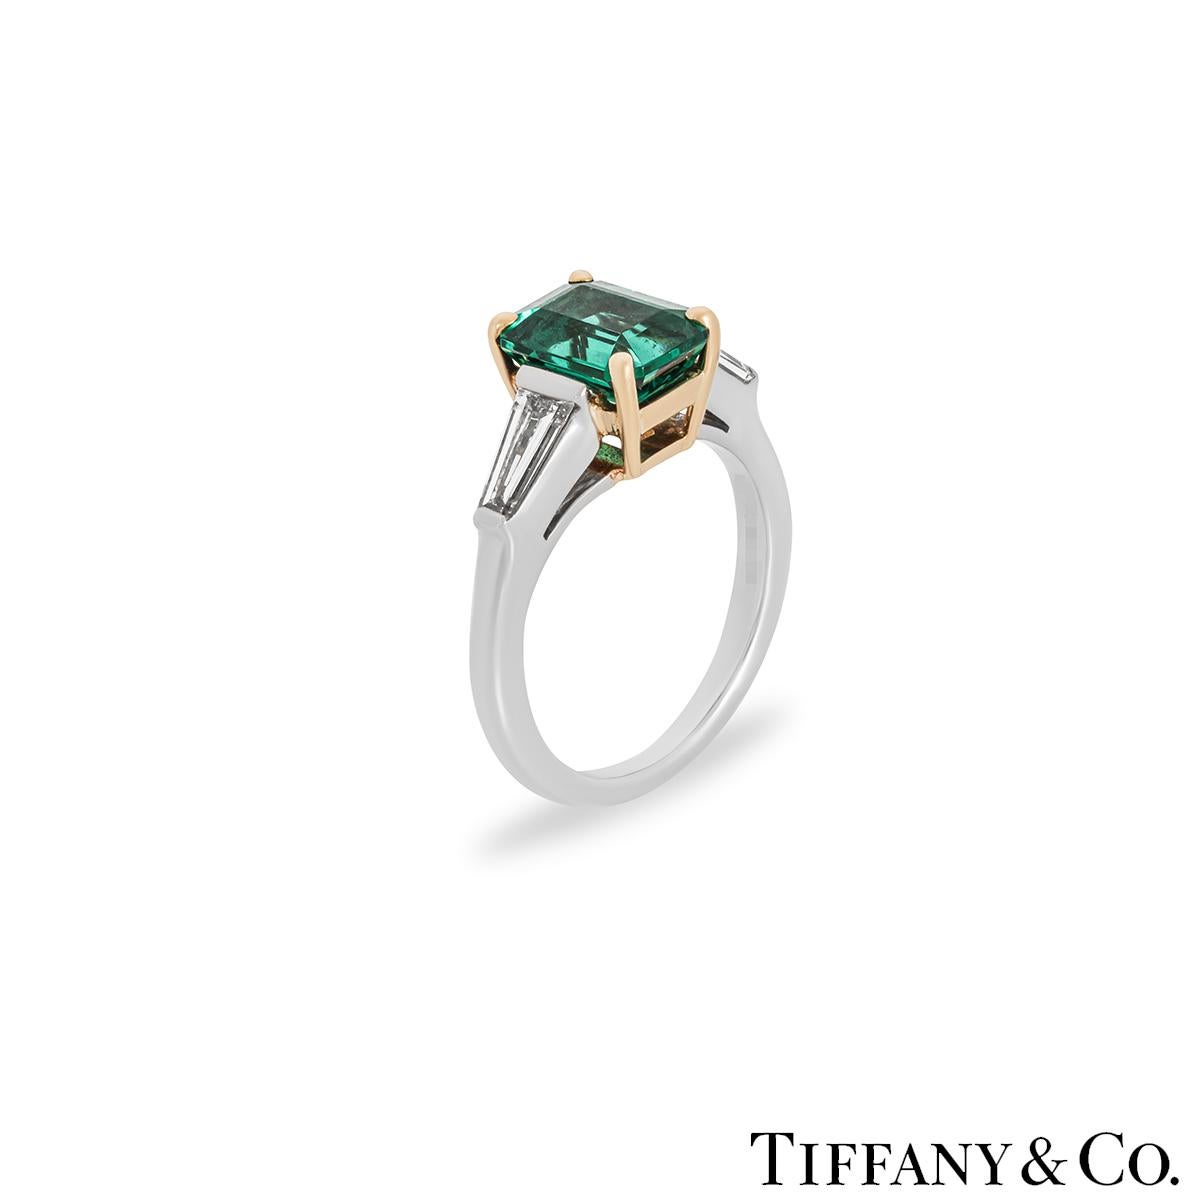 An exceptional platinum and 18k yellow gold emerald and diamond ring from Tiffany & Co. Adorning the centre of this three stone ring is an emerald cut emerald set in a yellow gold four prong mount, weighing 1.61ct and displaying a vivid green hue.